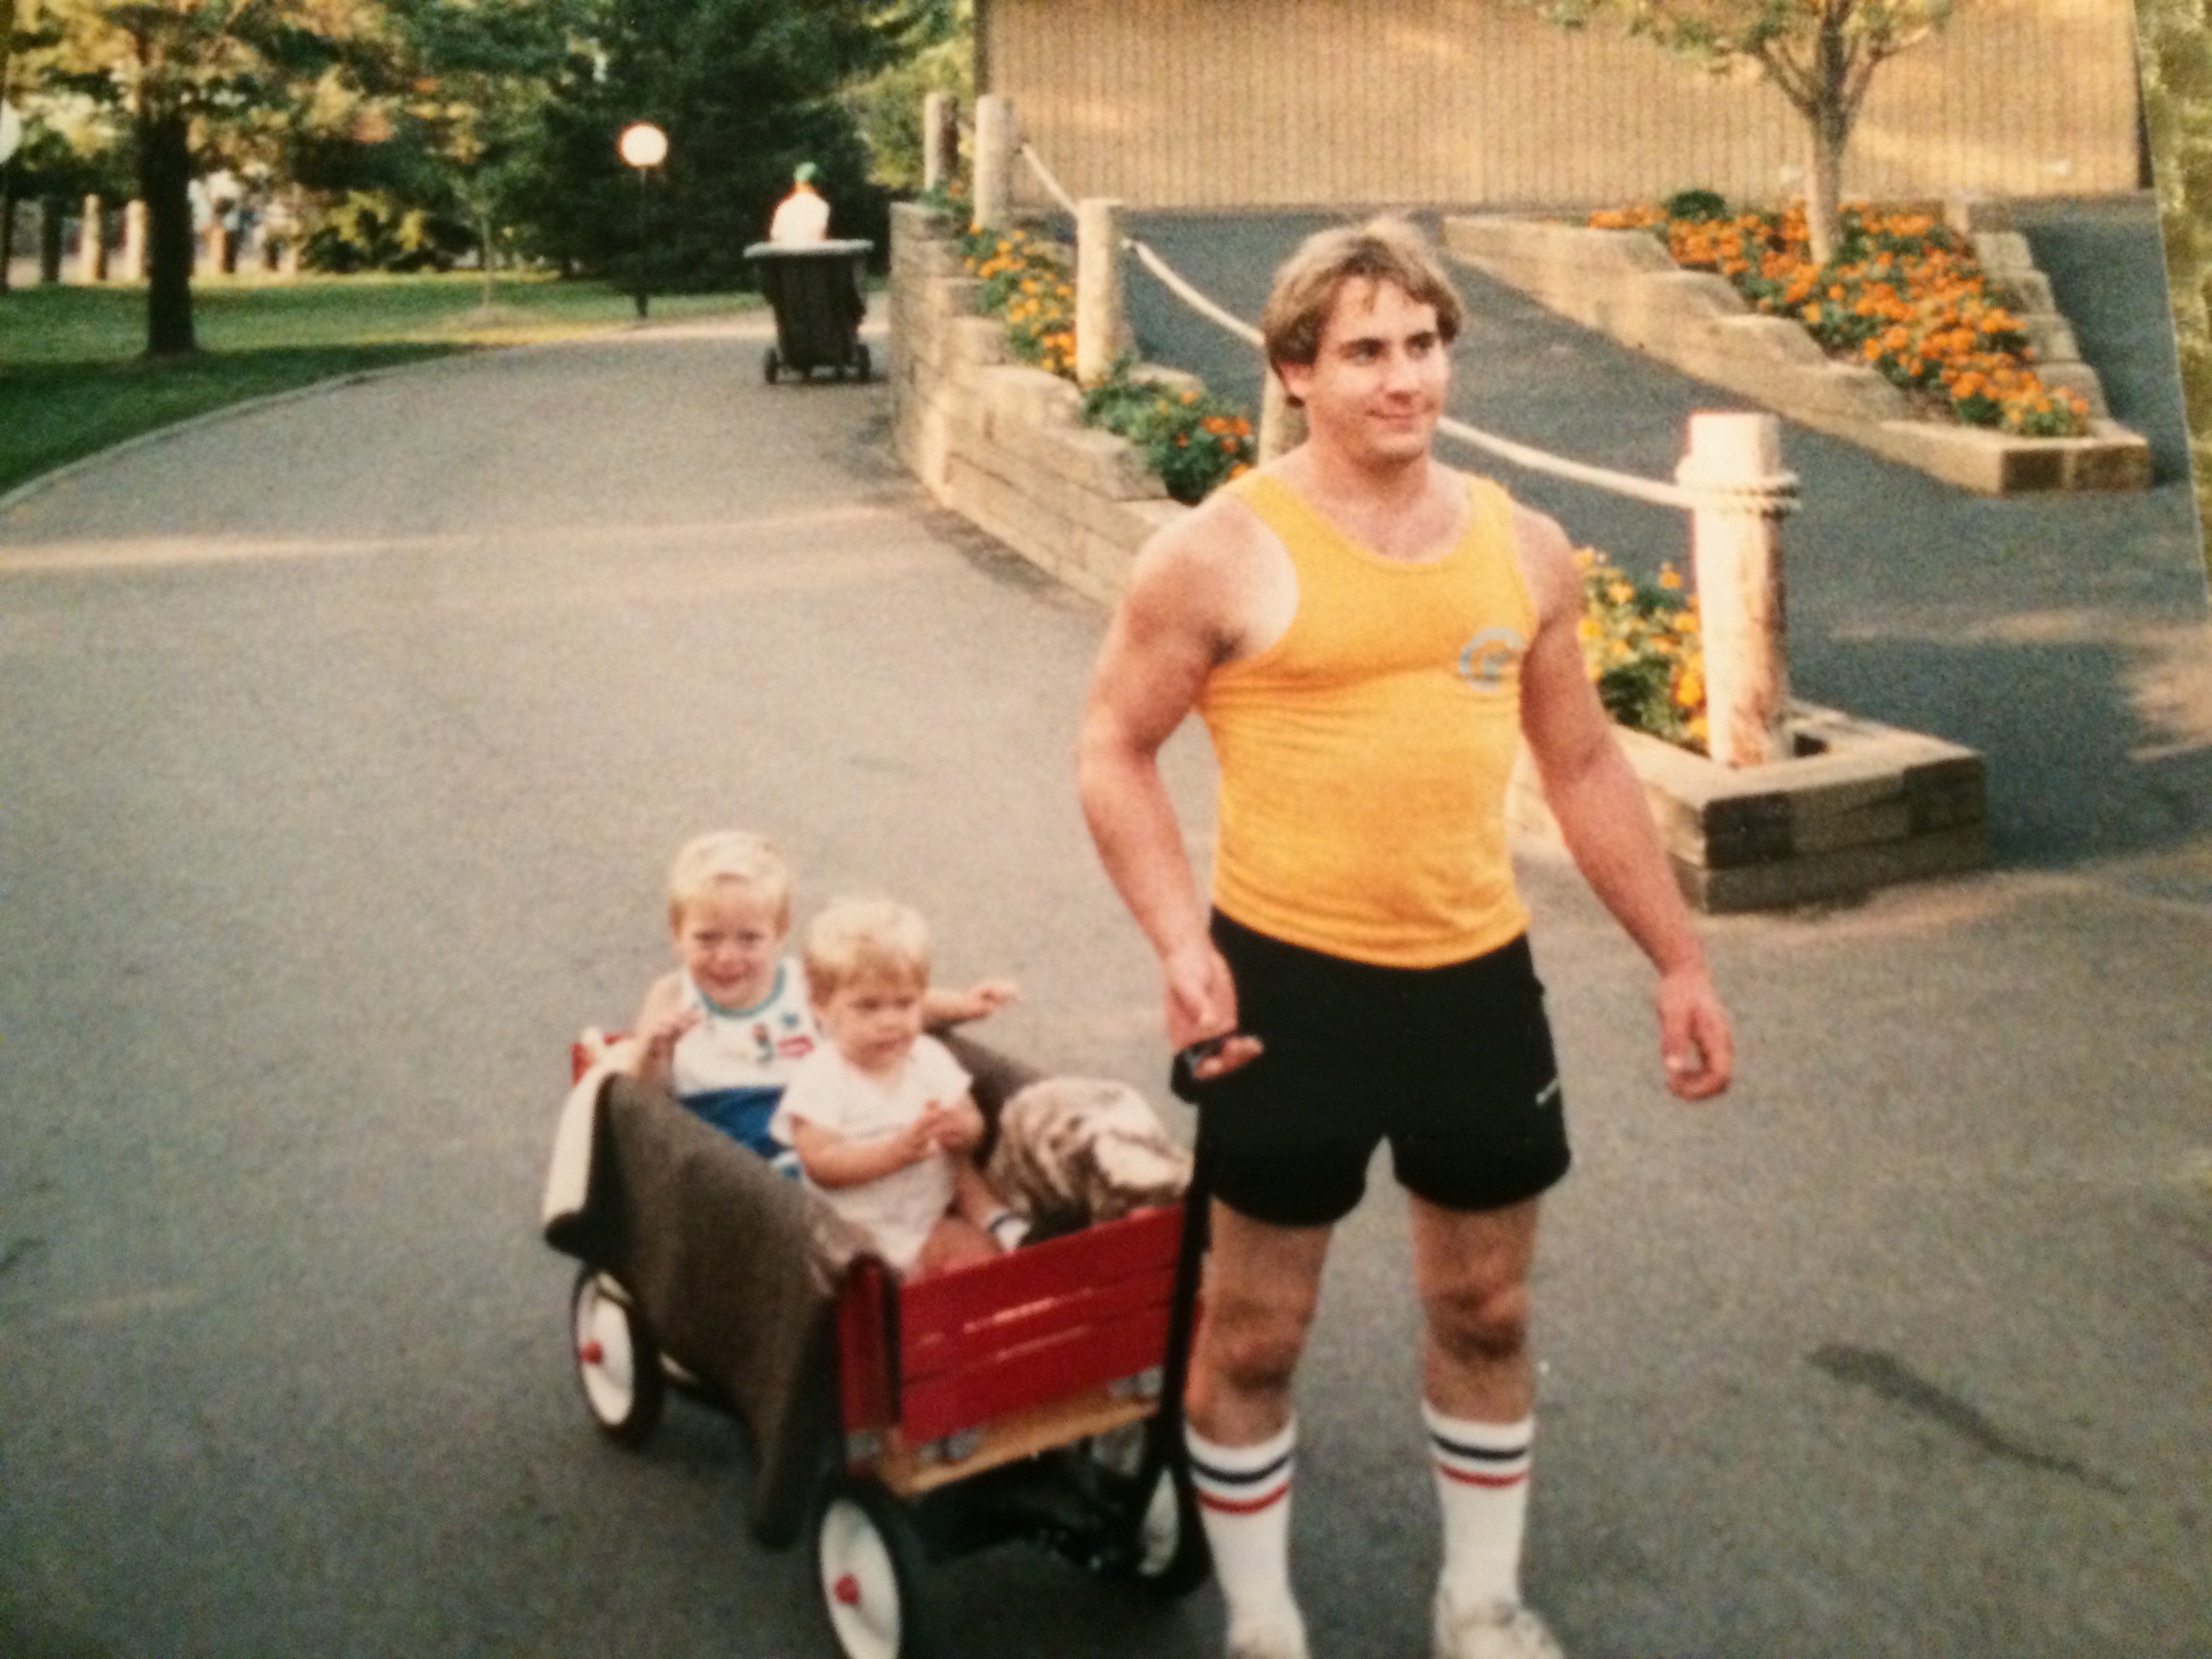 Dad with David and sister in wagon.jpg